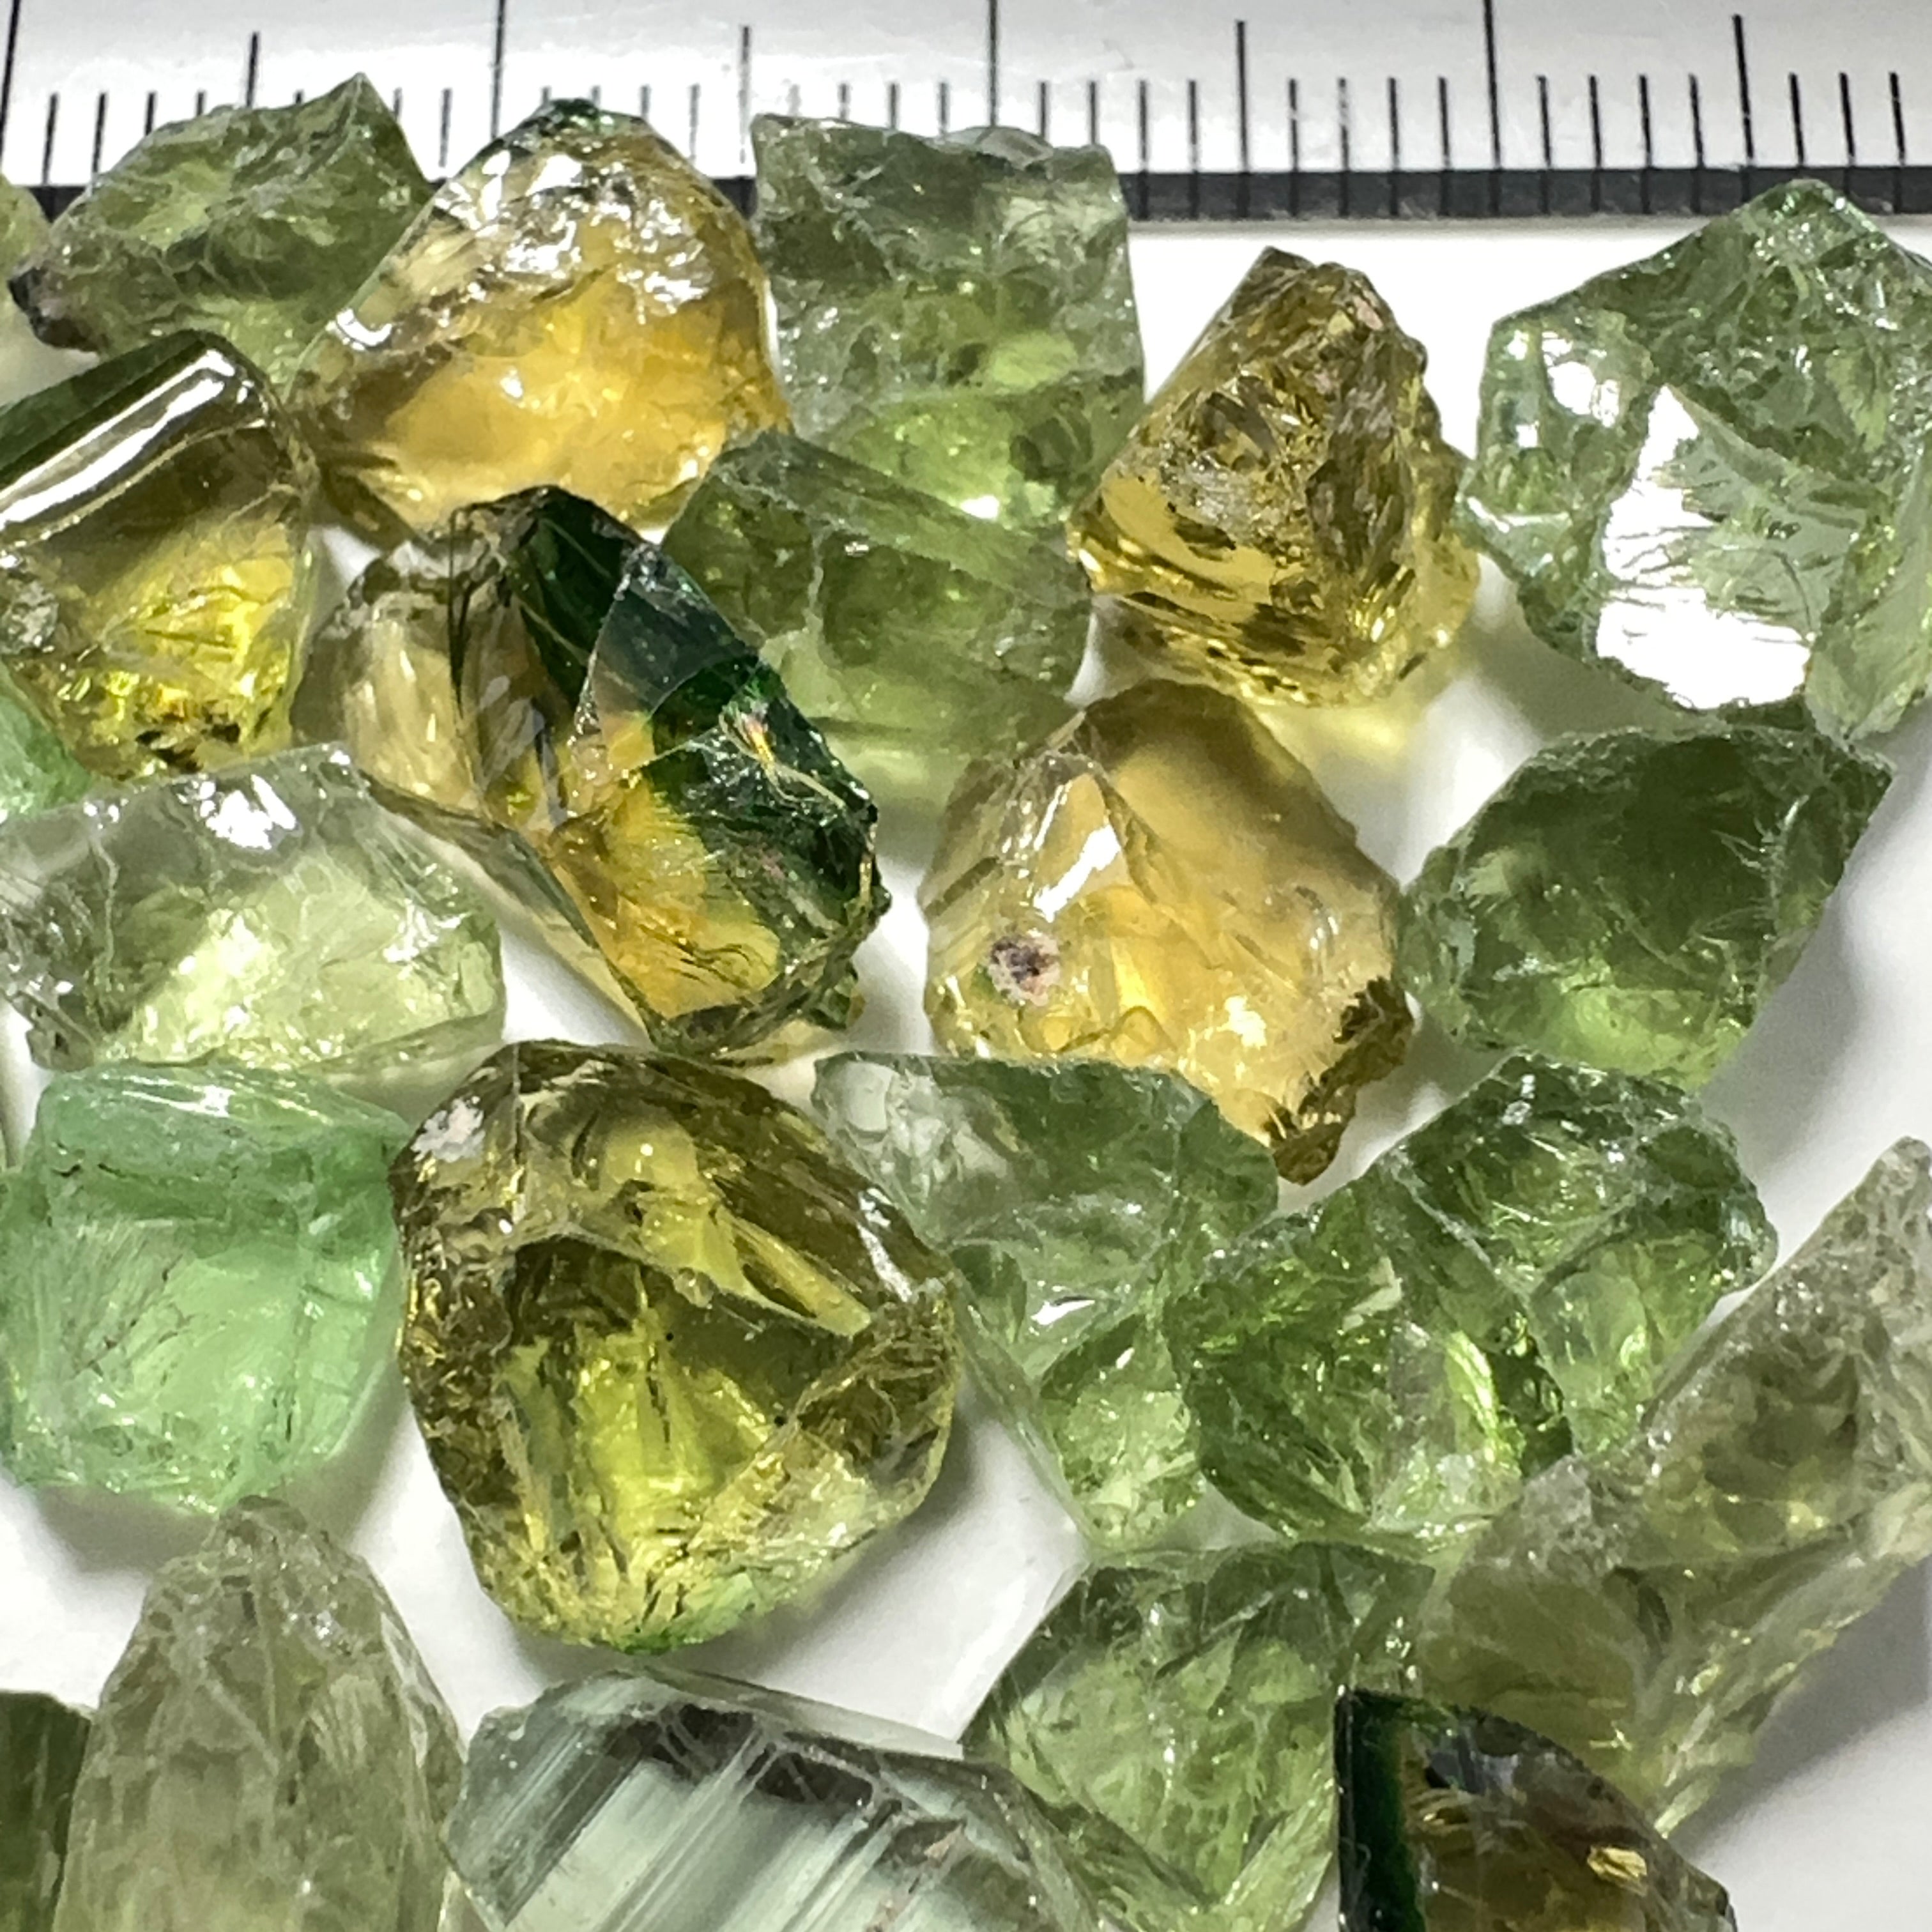 76.75ct mixed lot of Tsavorites, Tourmalines, Diopsides, from Tanzania, slightly included to Included of anyone would like to work with this